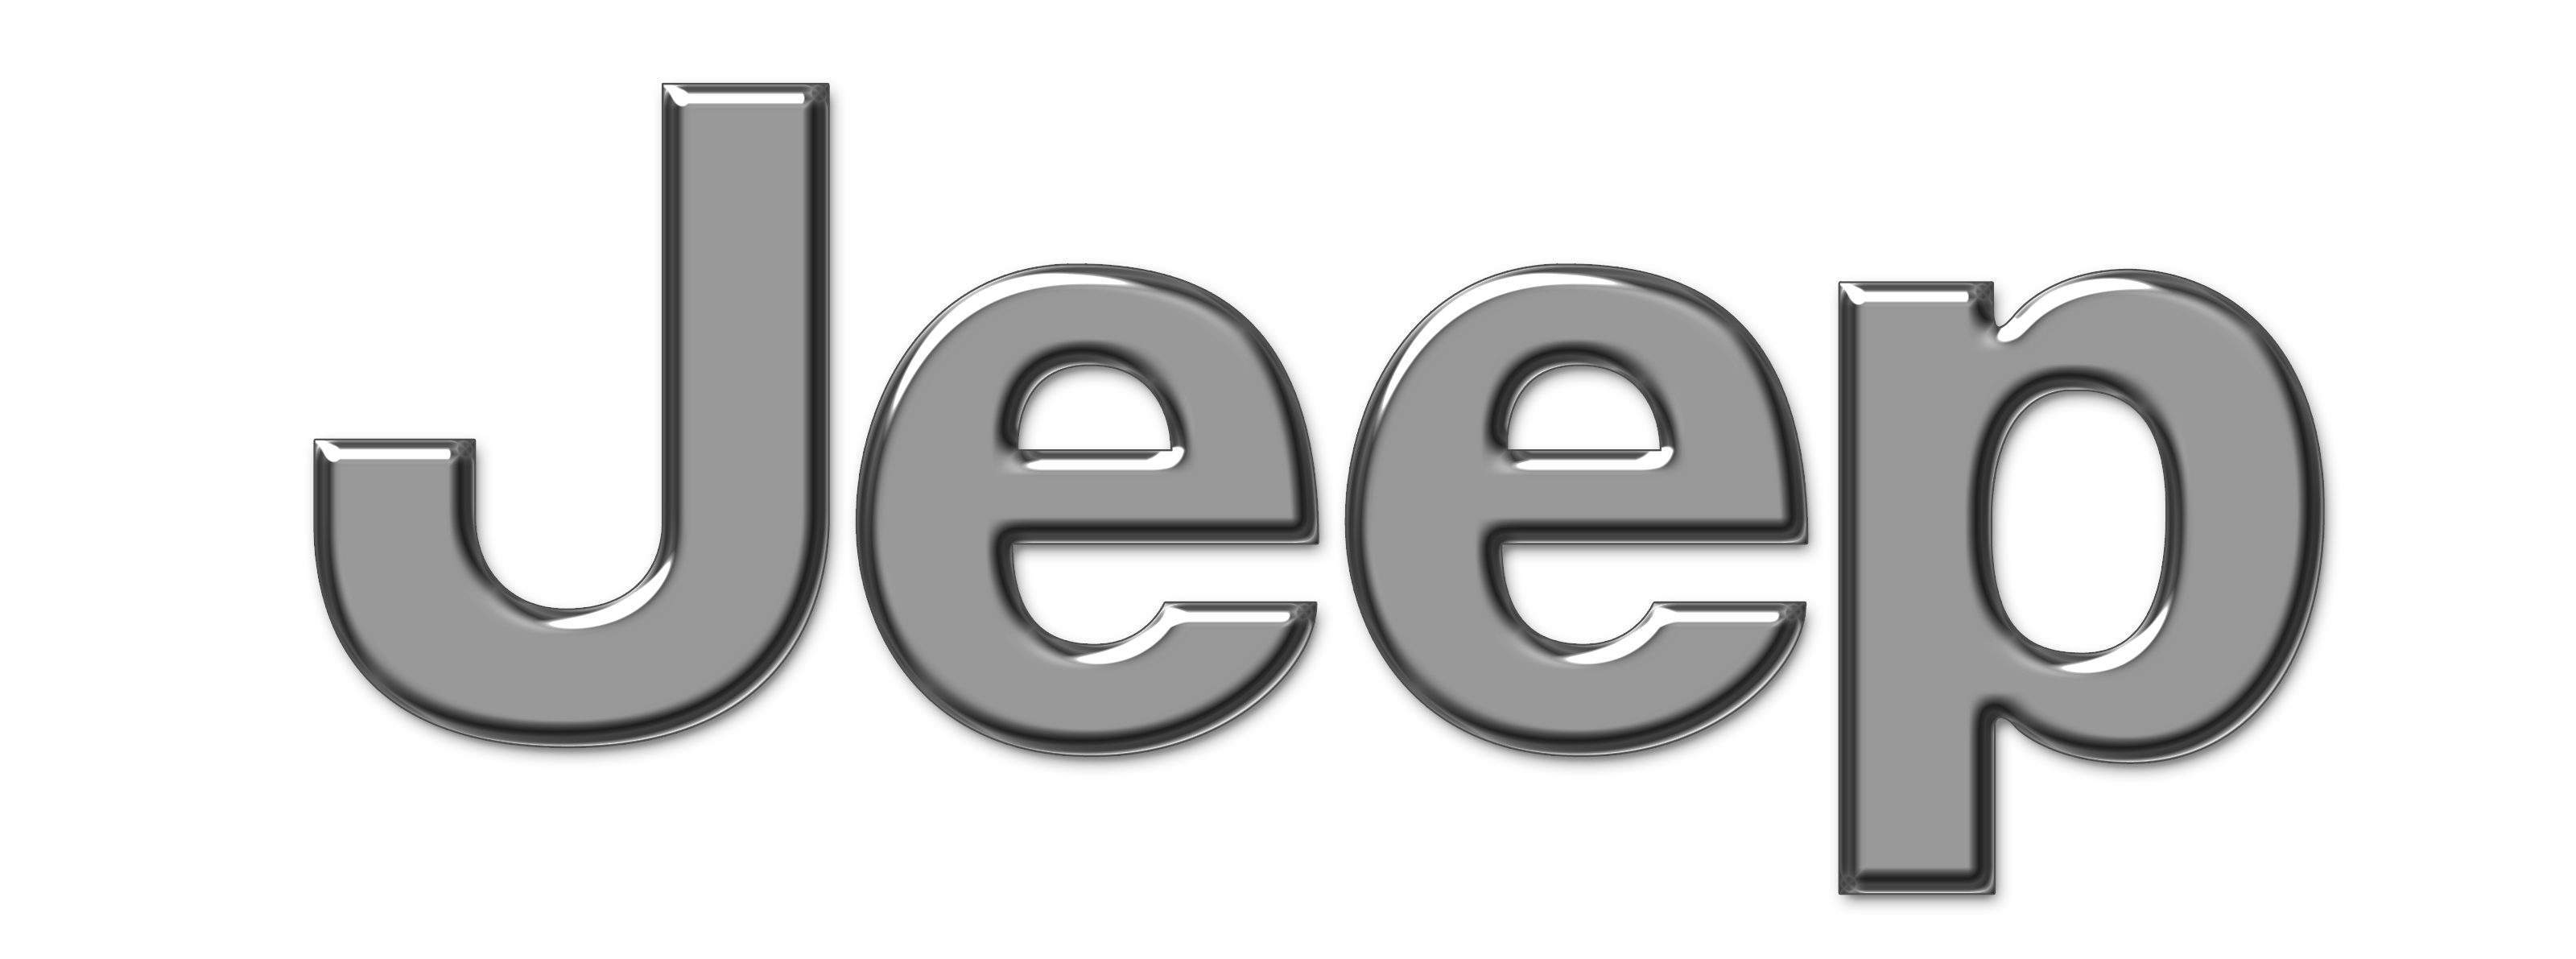 Jeep Logo PNG - 179067